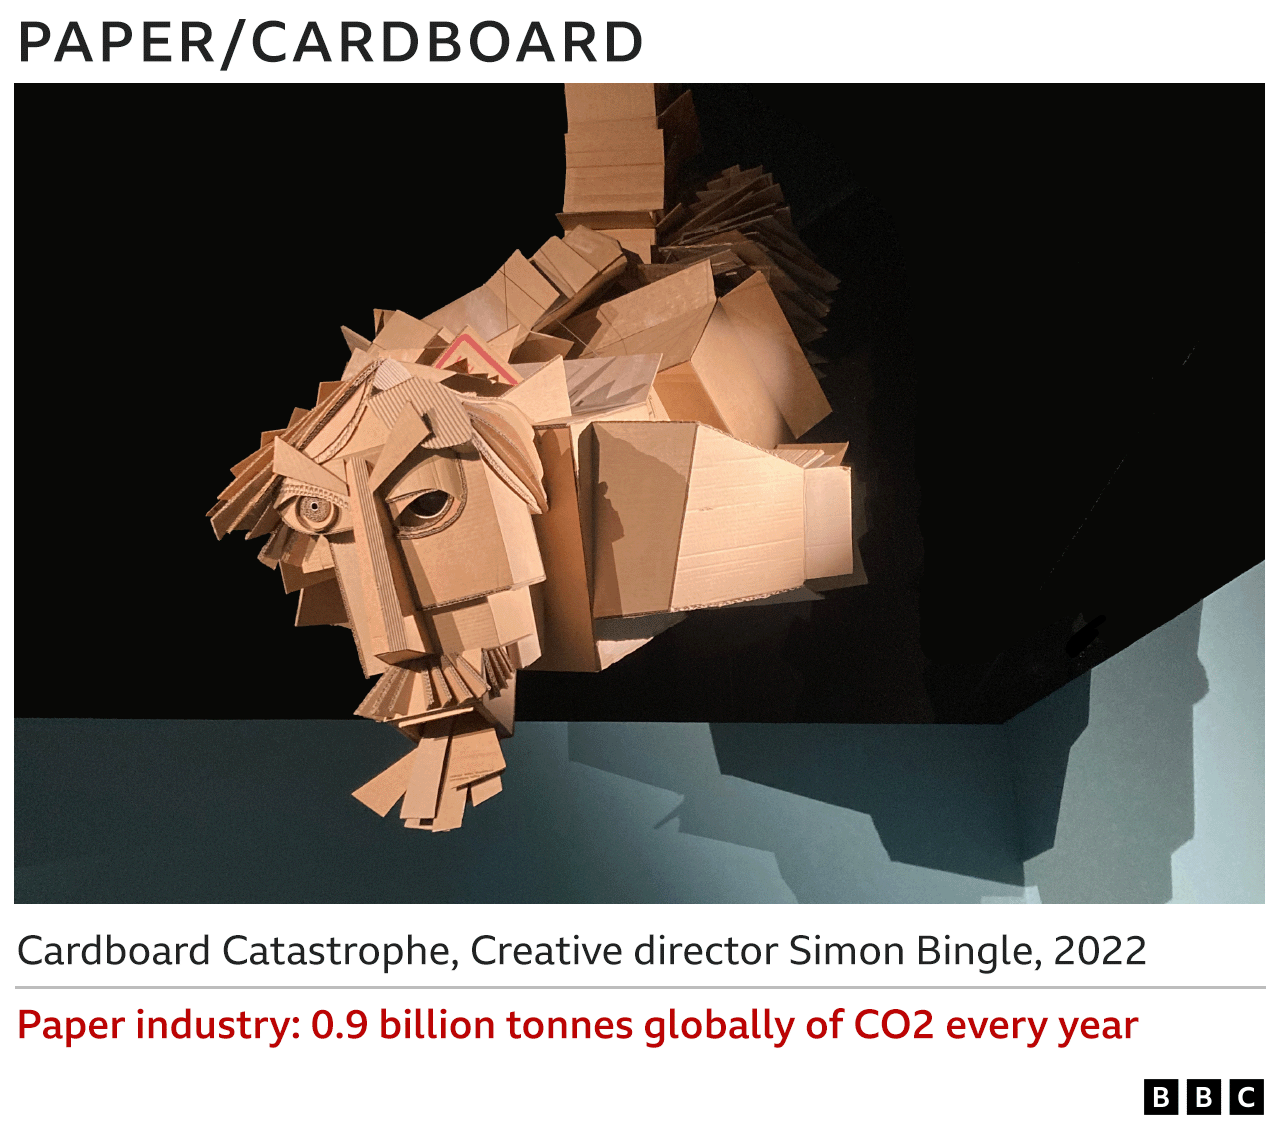 Images of cardboard sculpture - Cardboard Catastrophe, Simon Bingle, 2022 - Paper industry 0.9bn tonnes globally of CO2 every year